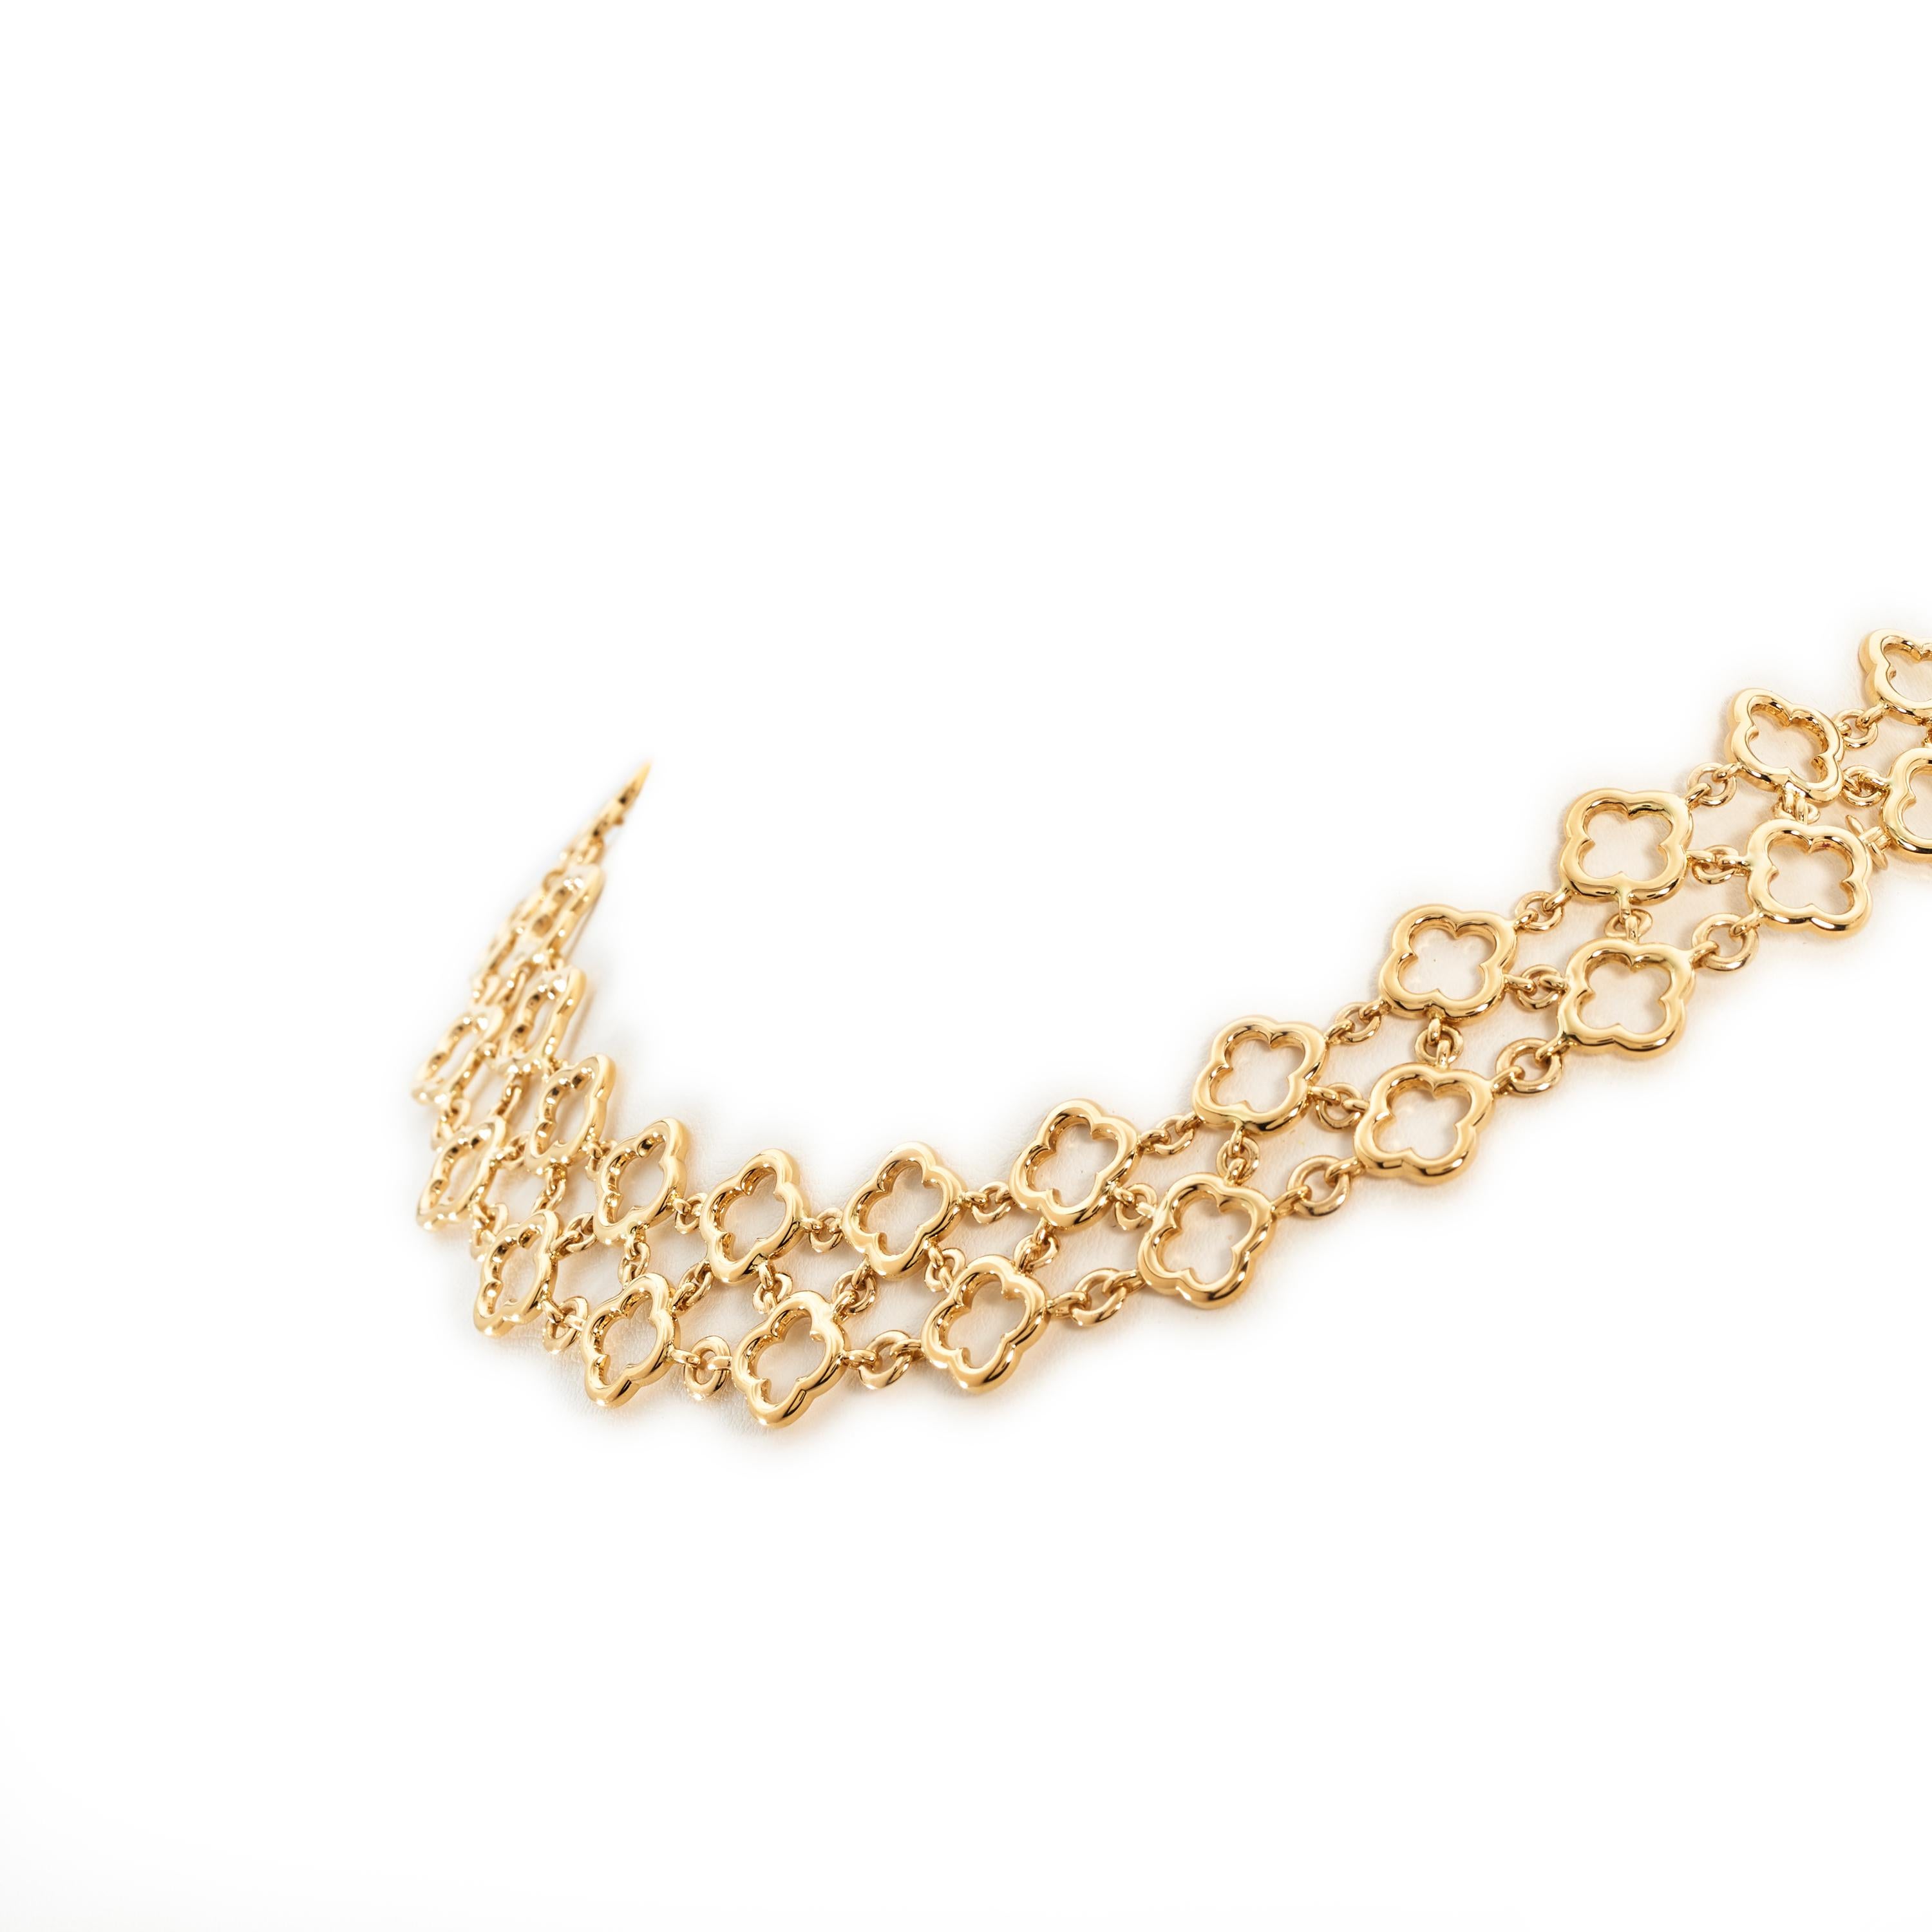 Authentic Van Cleef & Arpels Byzantine Alhambra necklace crafted in 18 karat yellow gold and featuring two rows of open work clover motifs, linked together in a woven pattern. The necklace measures 16 inches in length and approximately 3/4 inch in